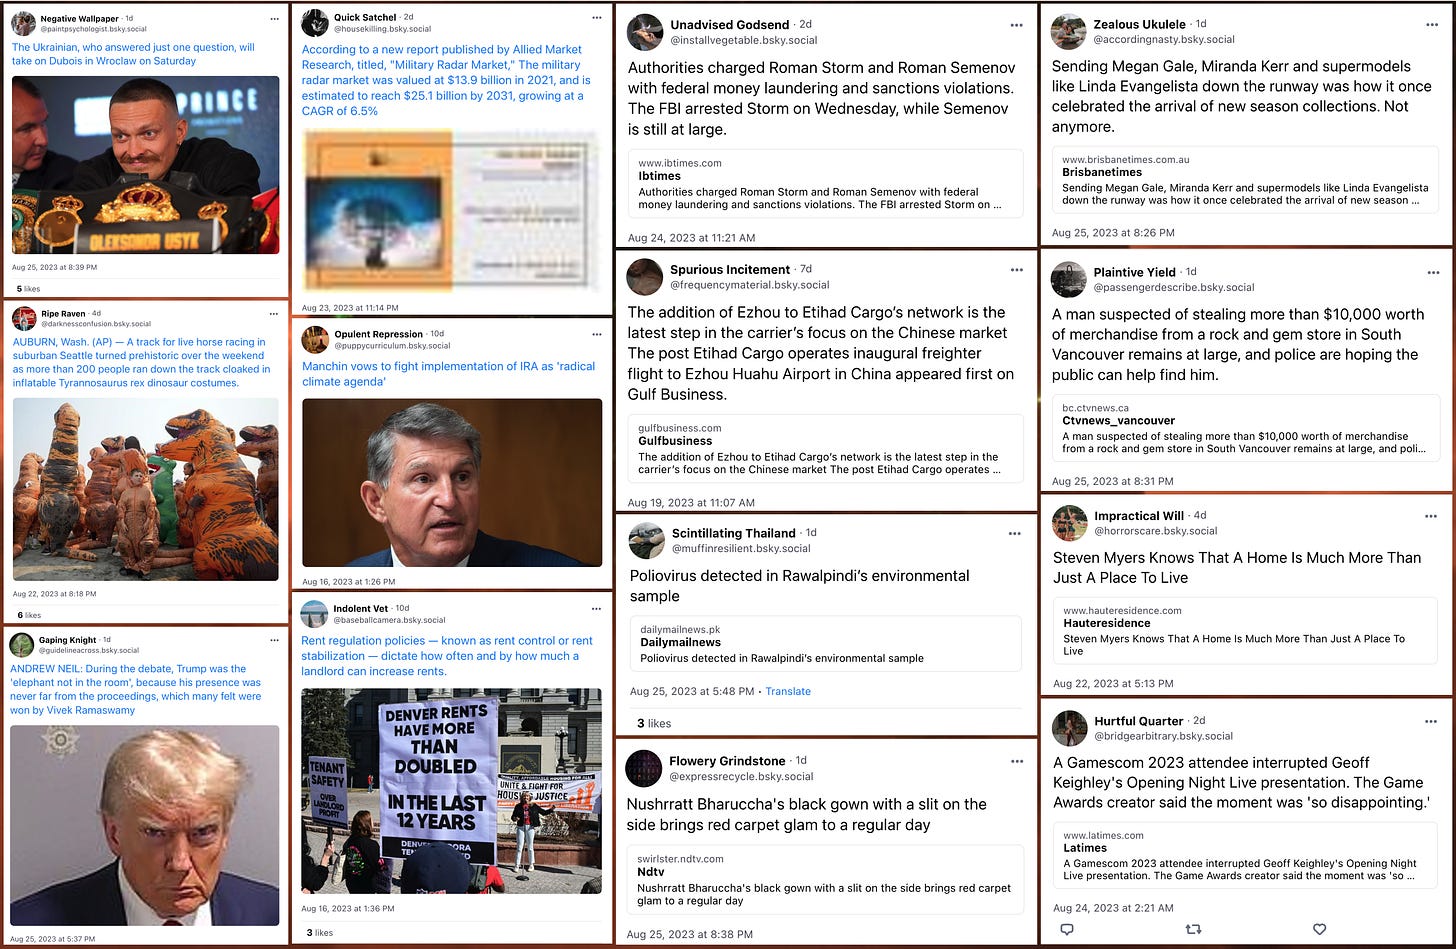 collage of posts from the network containing links to media sites